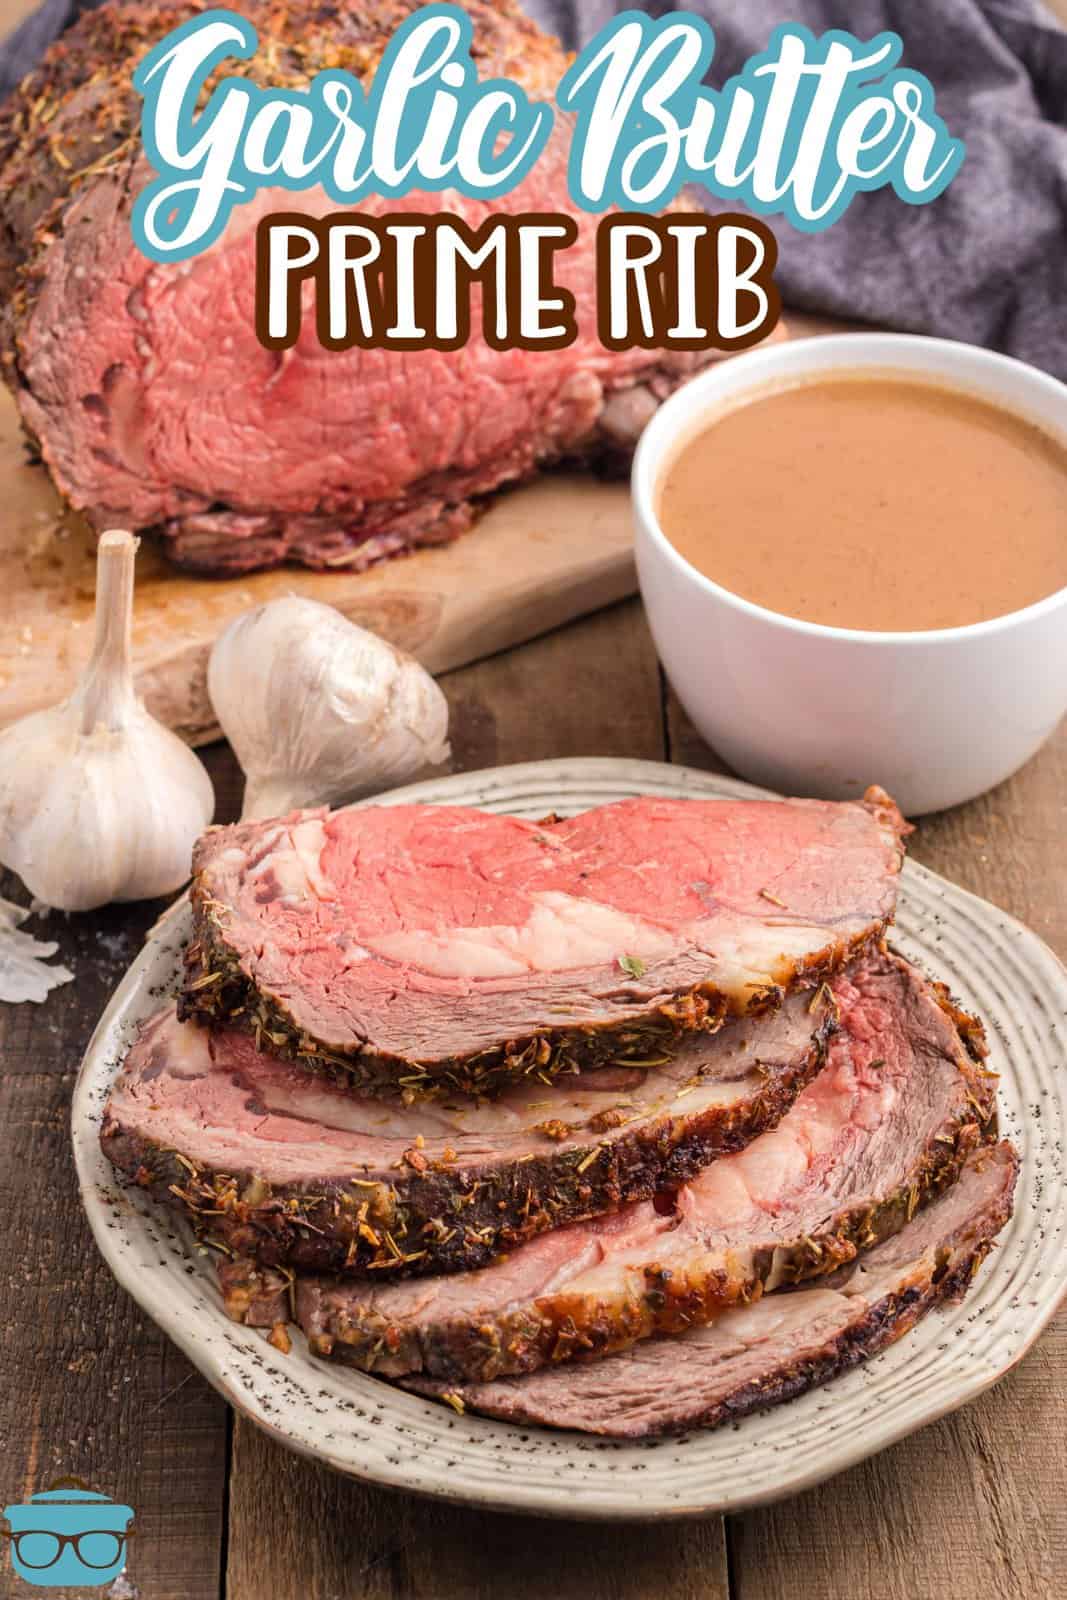 Pinterest image of sliiced Prime Rib on plate with garlic bulbs in background and au jus.